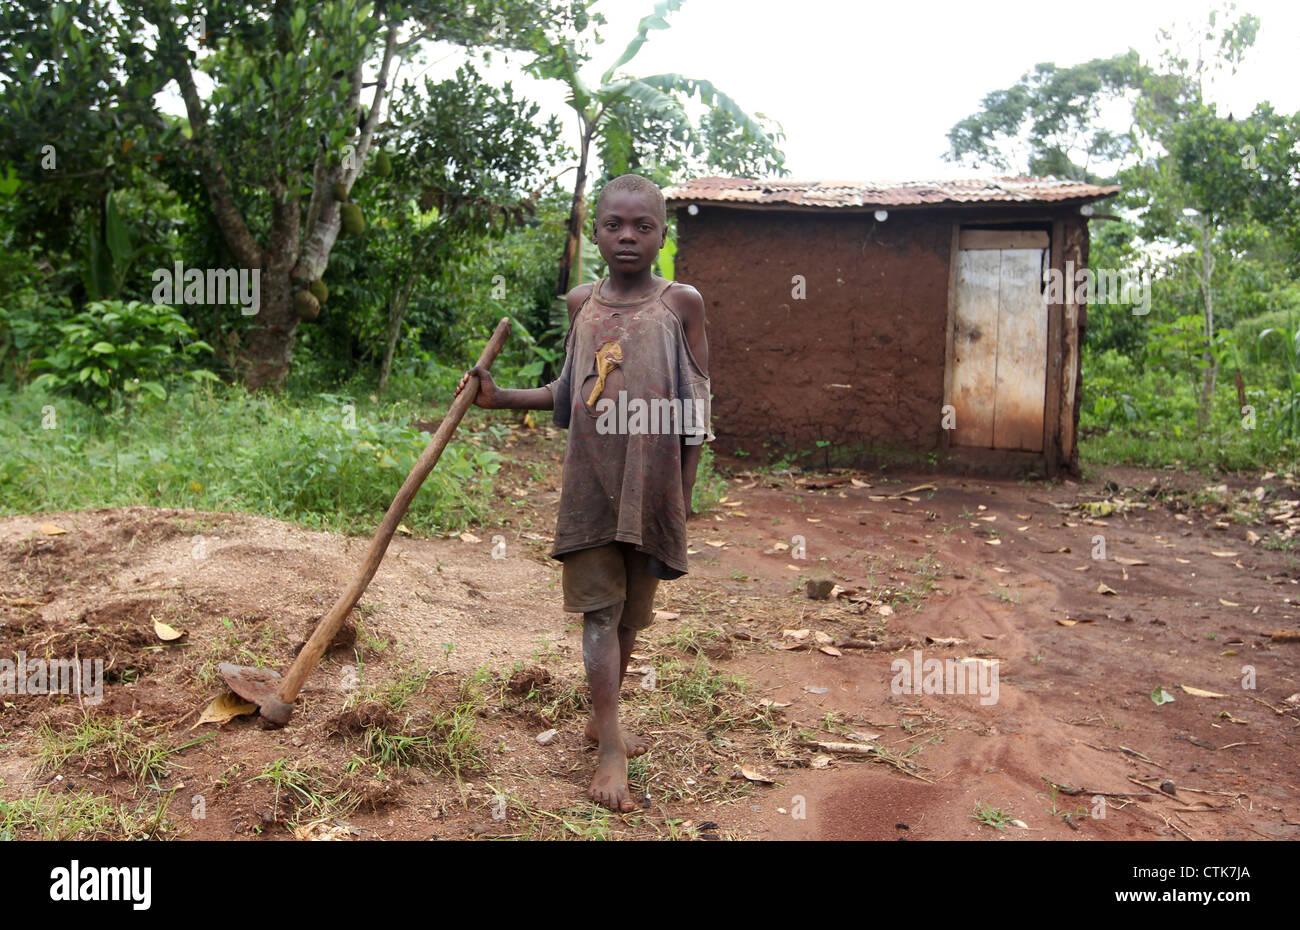 A young boy pictured outside his family home and small plot of land in the Mawale area of the Luwero district in central Uganda. Stock Photo